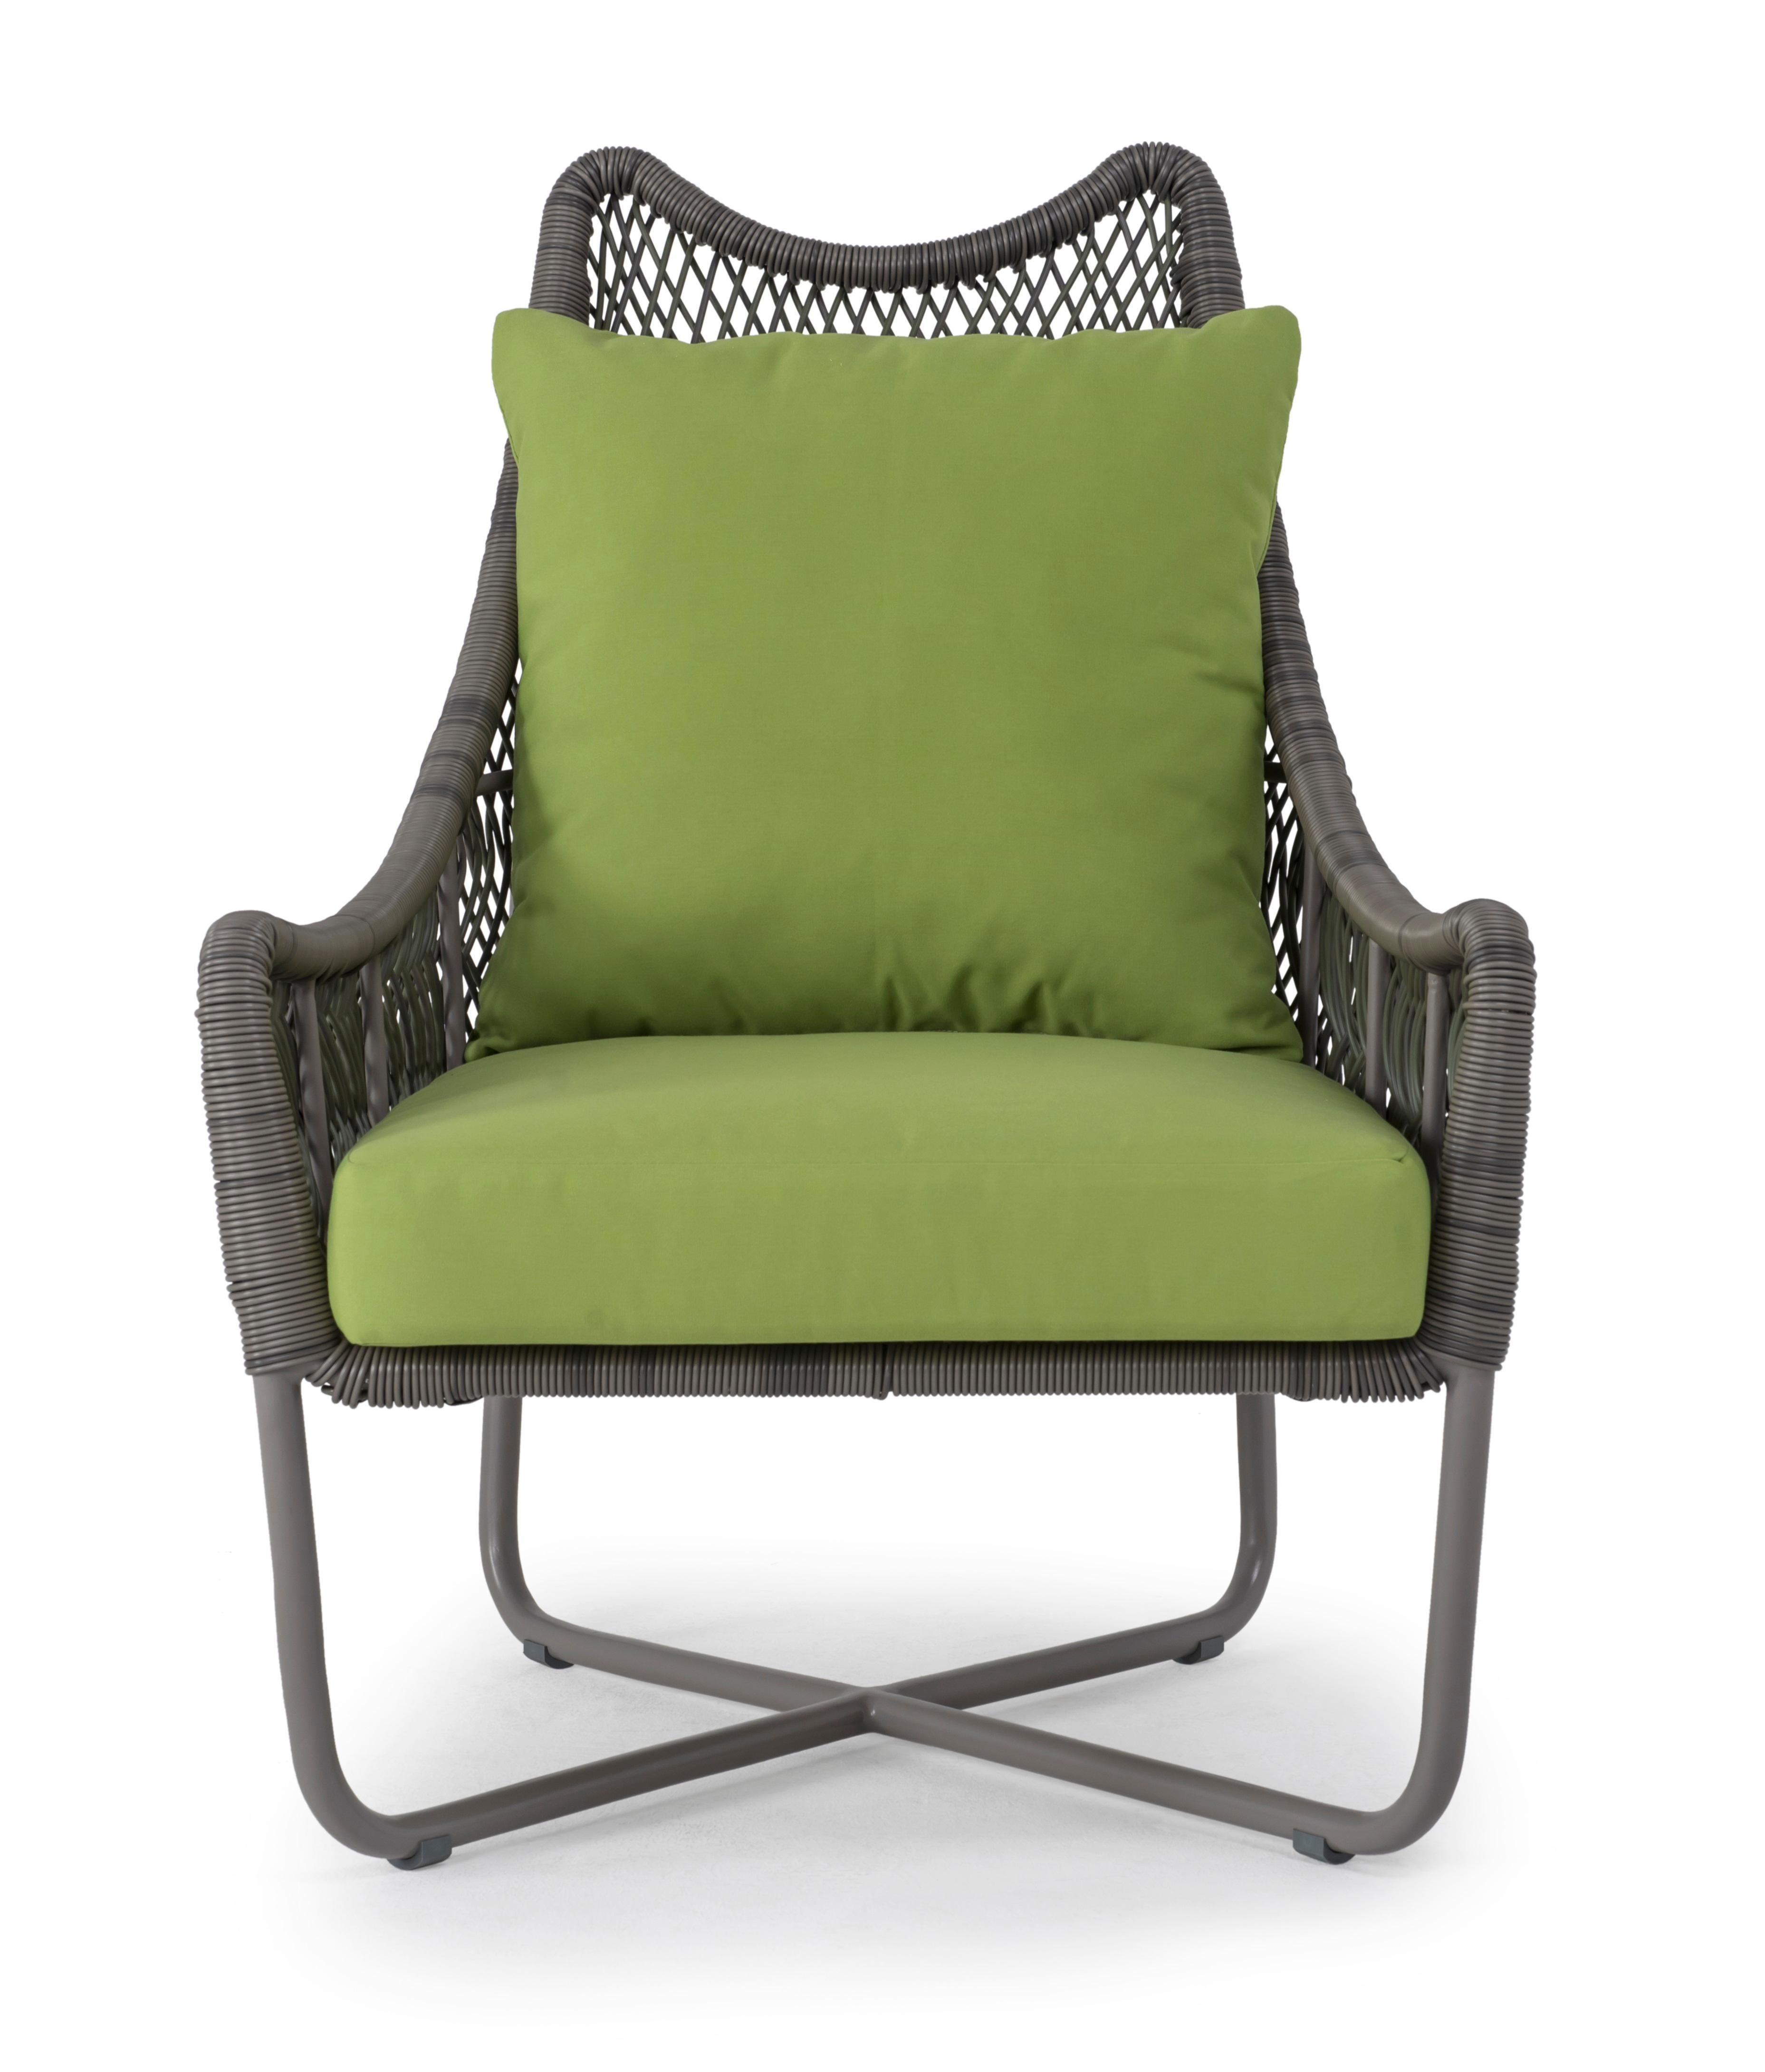 Russell easy armchair by Kenneth Cobonpue.
Materials: Polyethyelene, aluminum. 
Dimensions: 71.5 cm x 88.5 cm x h 99.5 cm

Russell brings the allure of escape to your space. Rest in its airy woven frame as stories of adventure across the land,